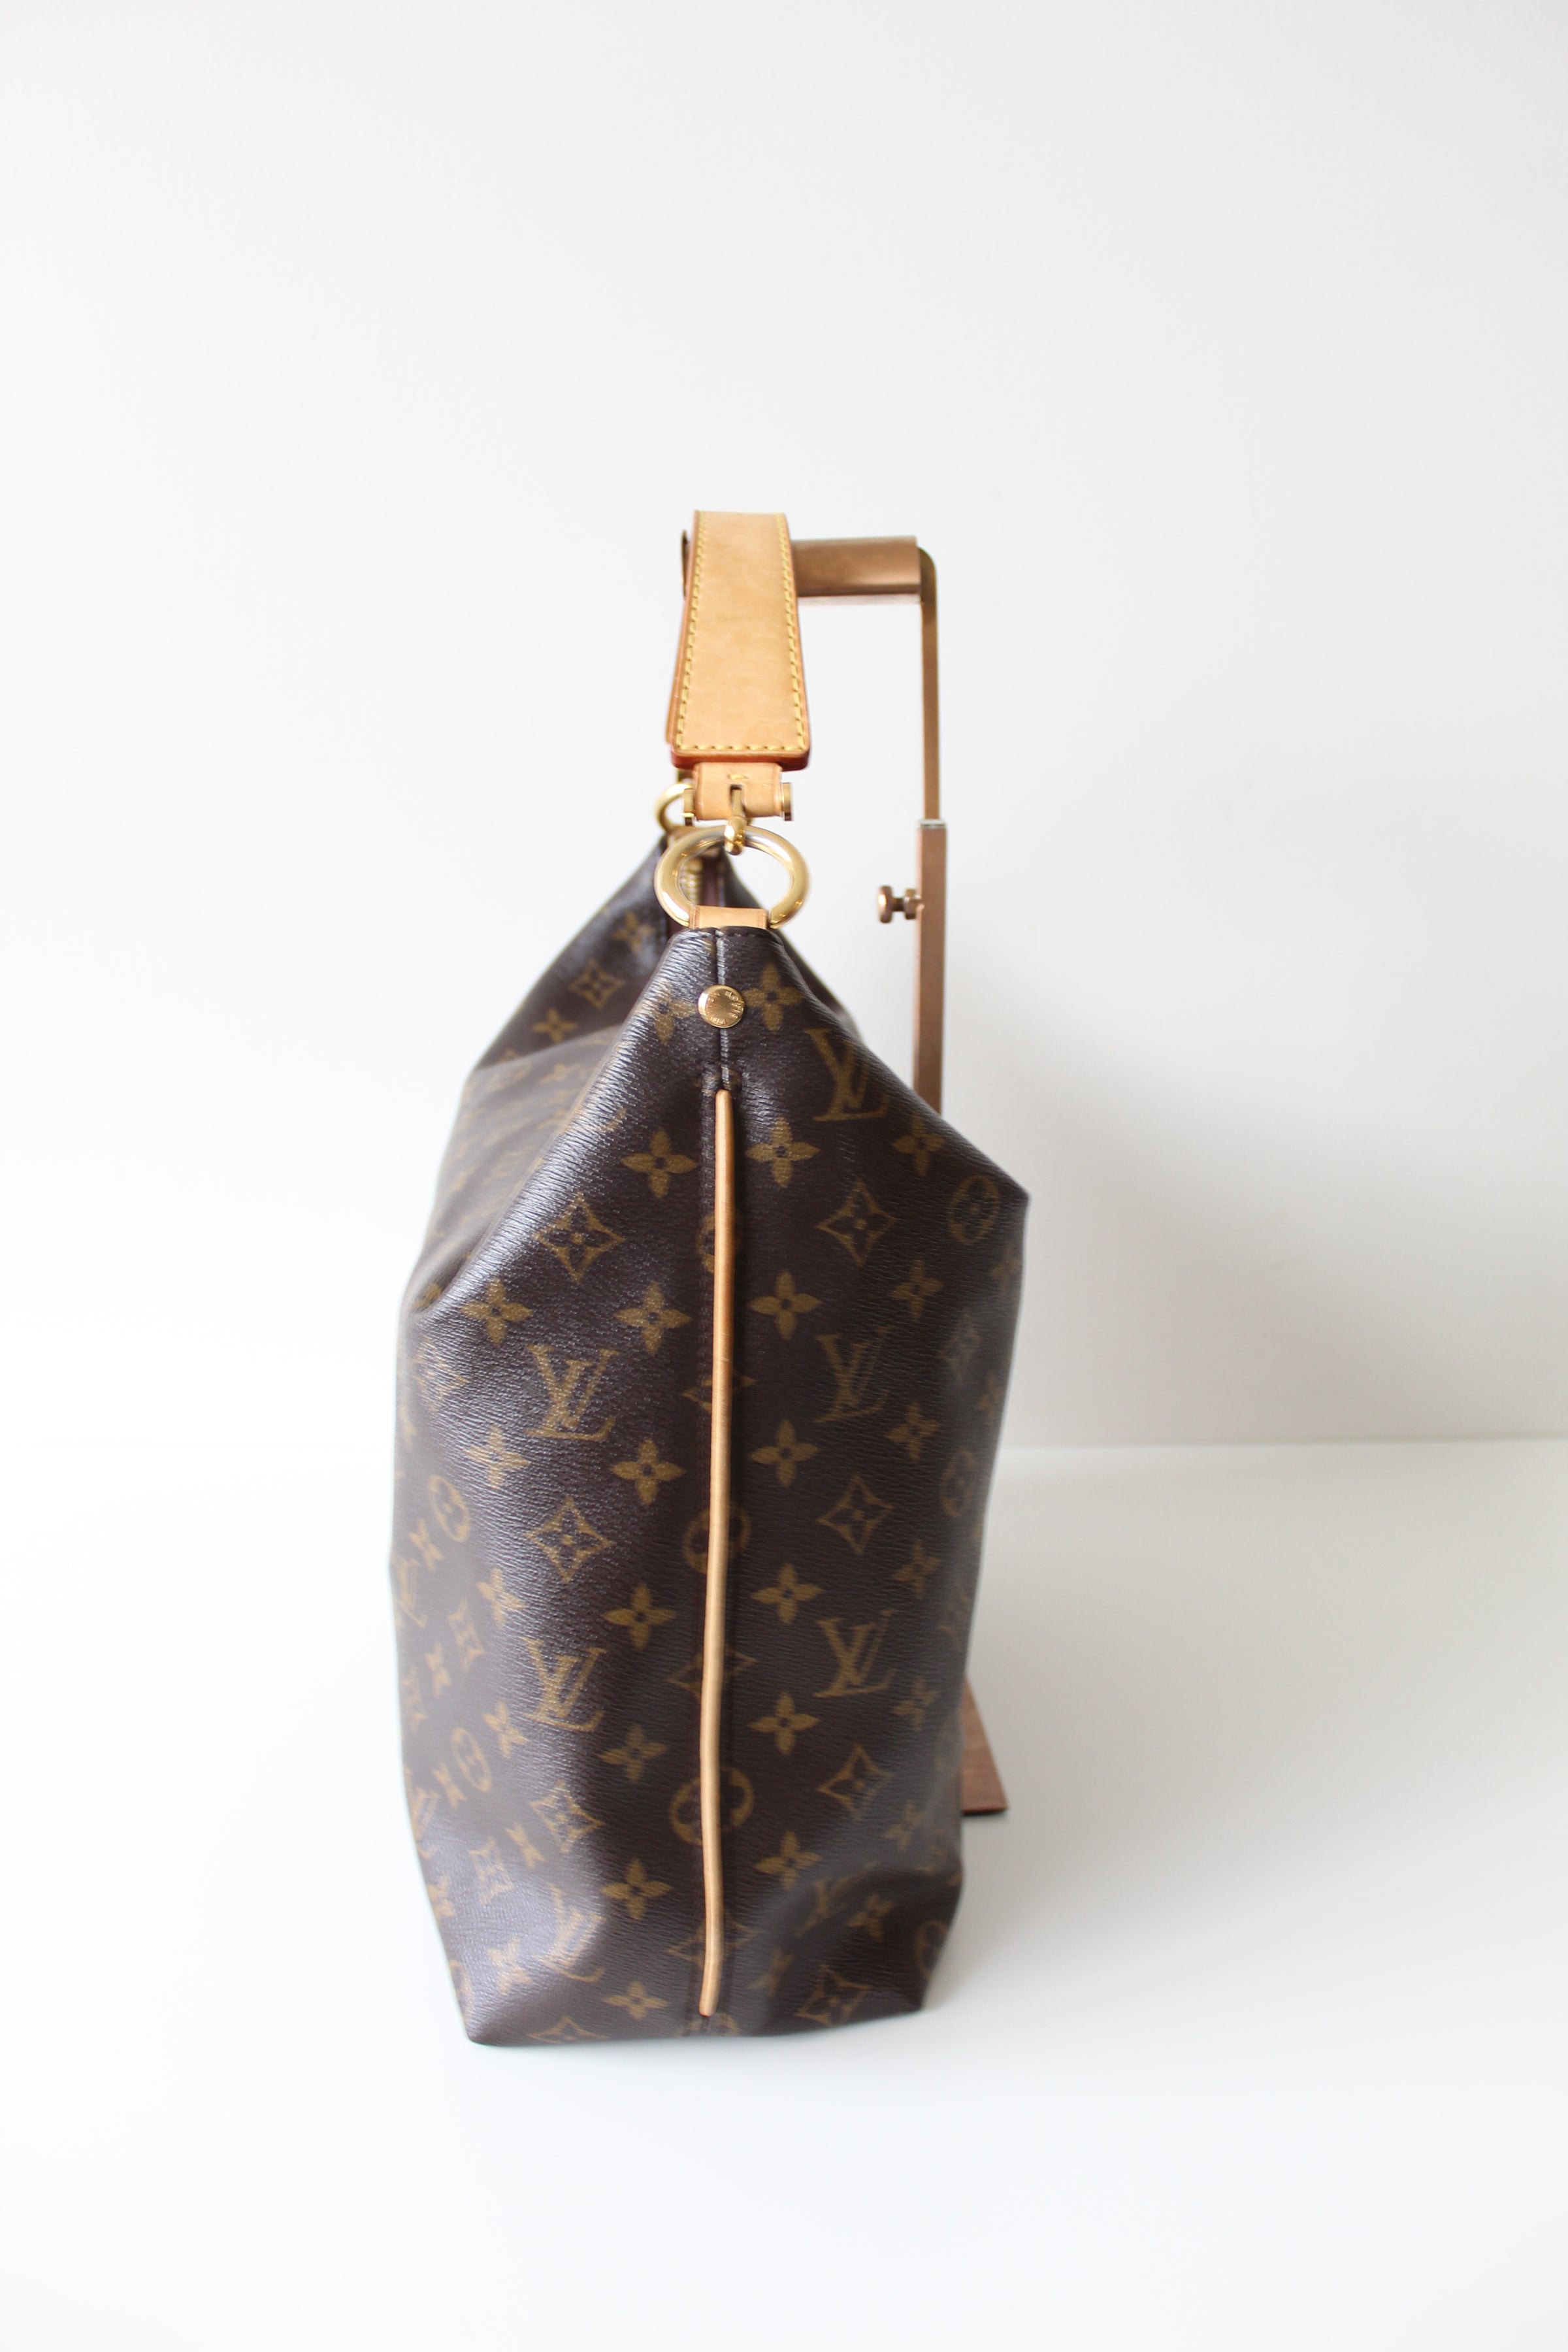 Louis Vuitton Sully - 4 For Sale on 1stDibs  louis vuitton sully pm retail  price, louis vuitton sully mm price, louis vuitton sully bag